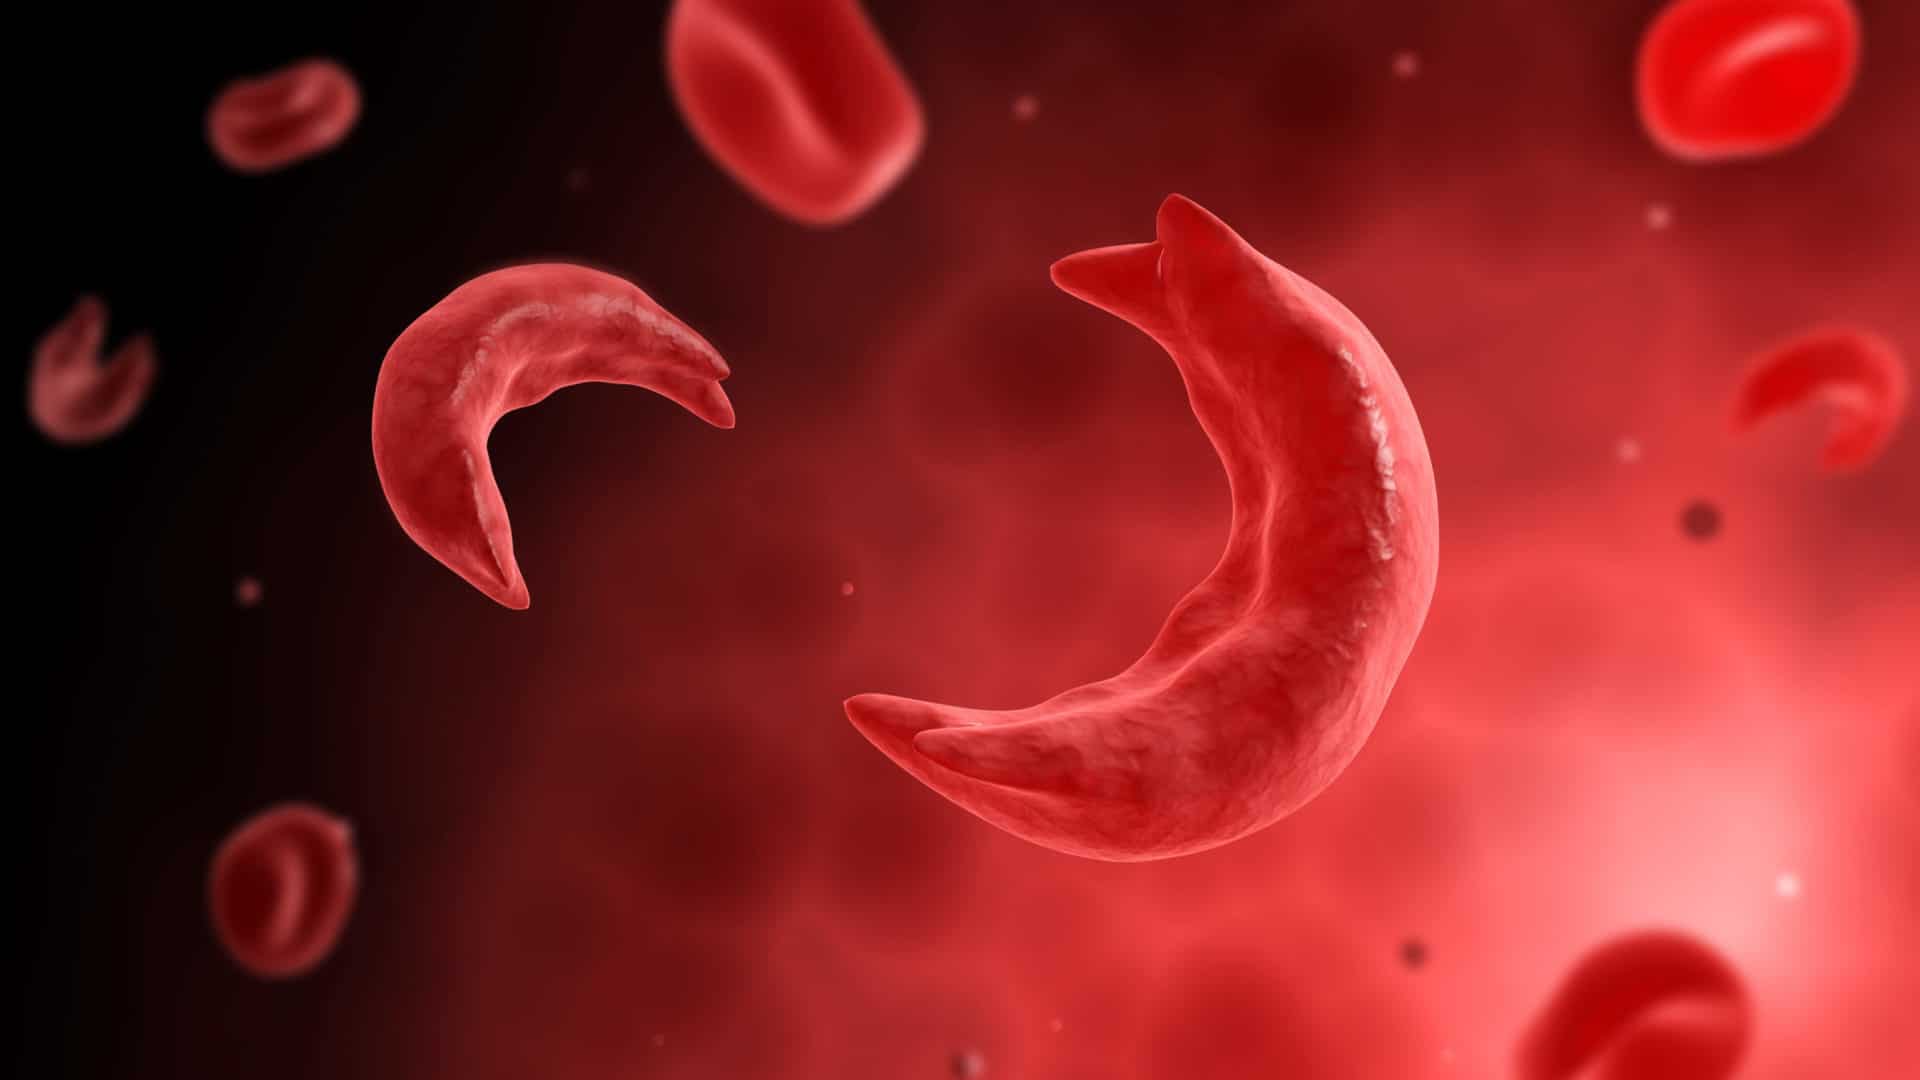 Sickle cell disease causes a patient's cells to  take on an abnormal C shape that can cause blockages and lead to stroke and organ damage, among other complications.